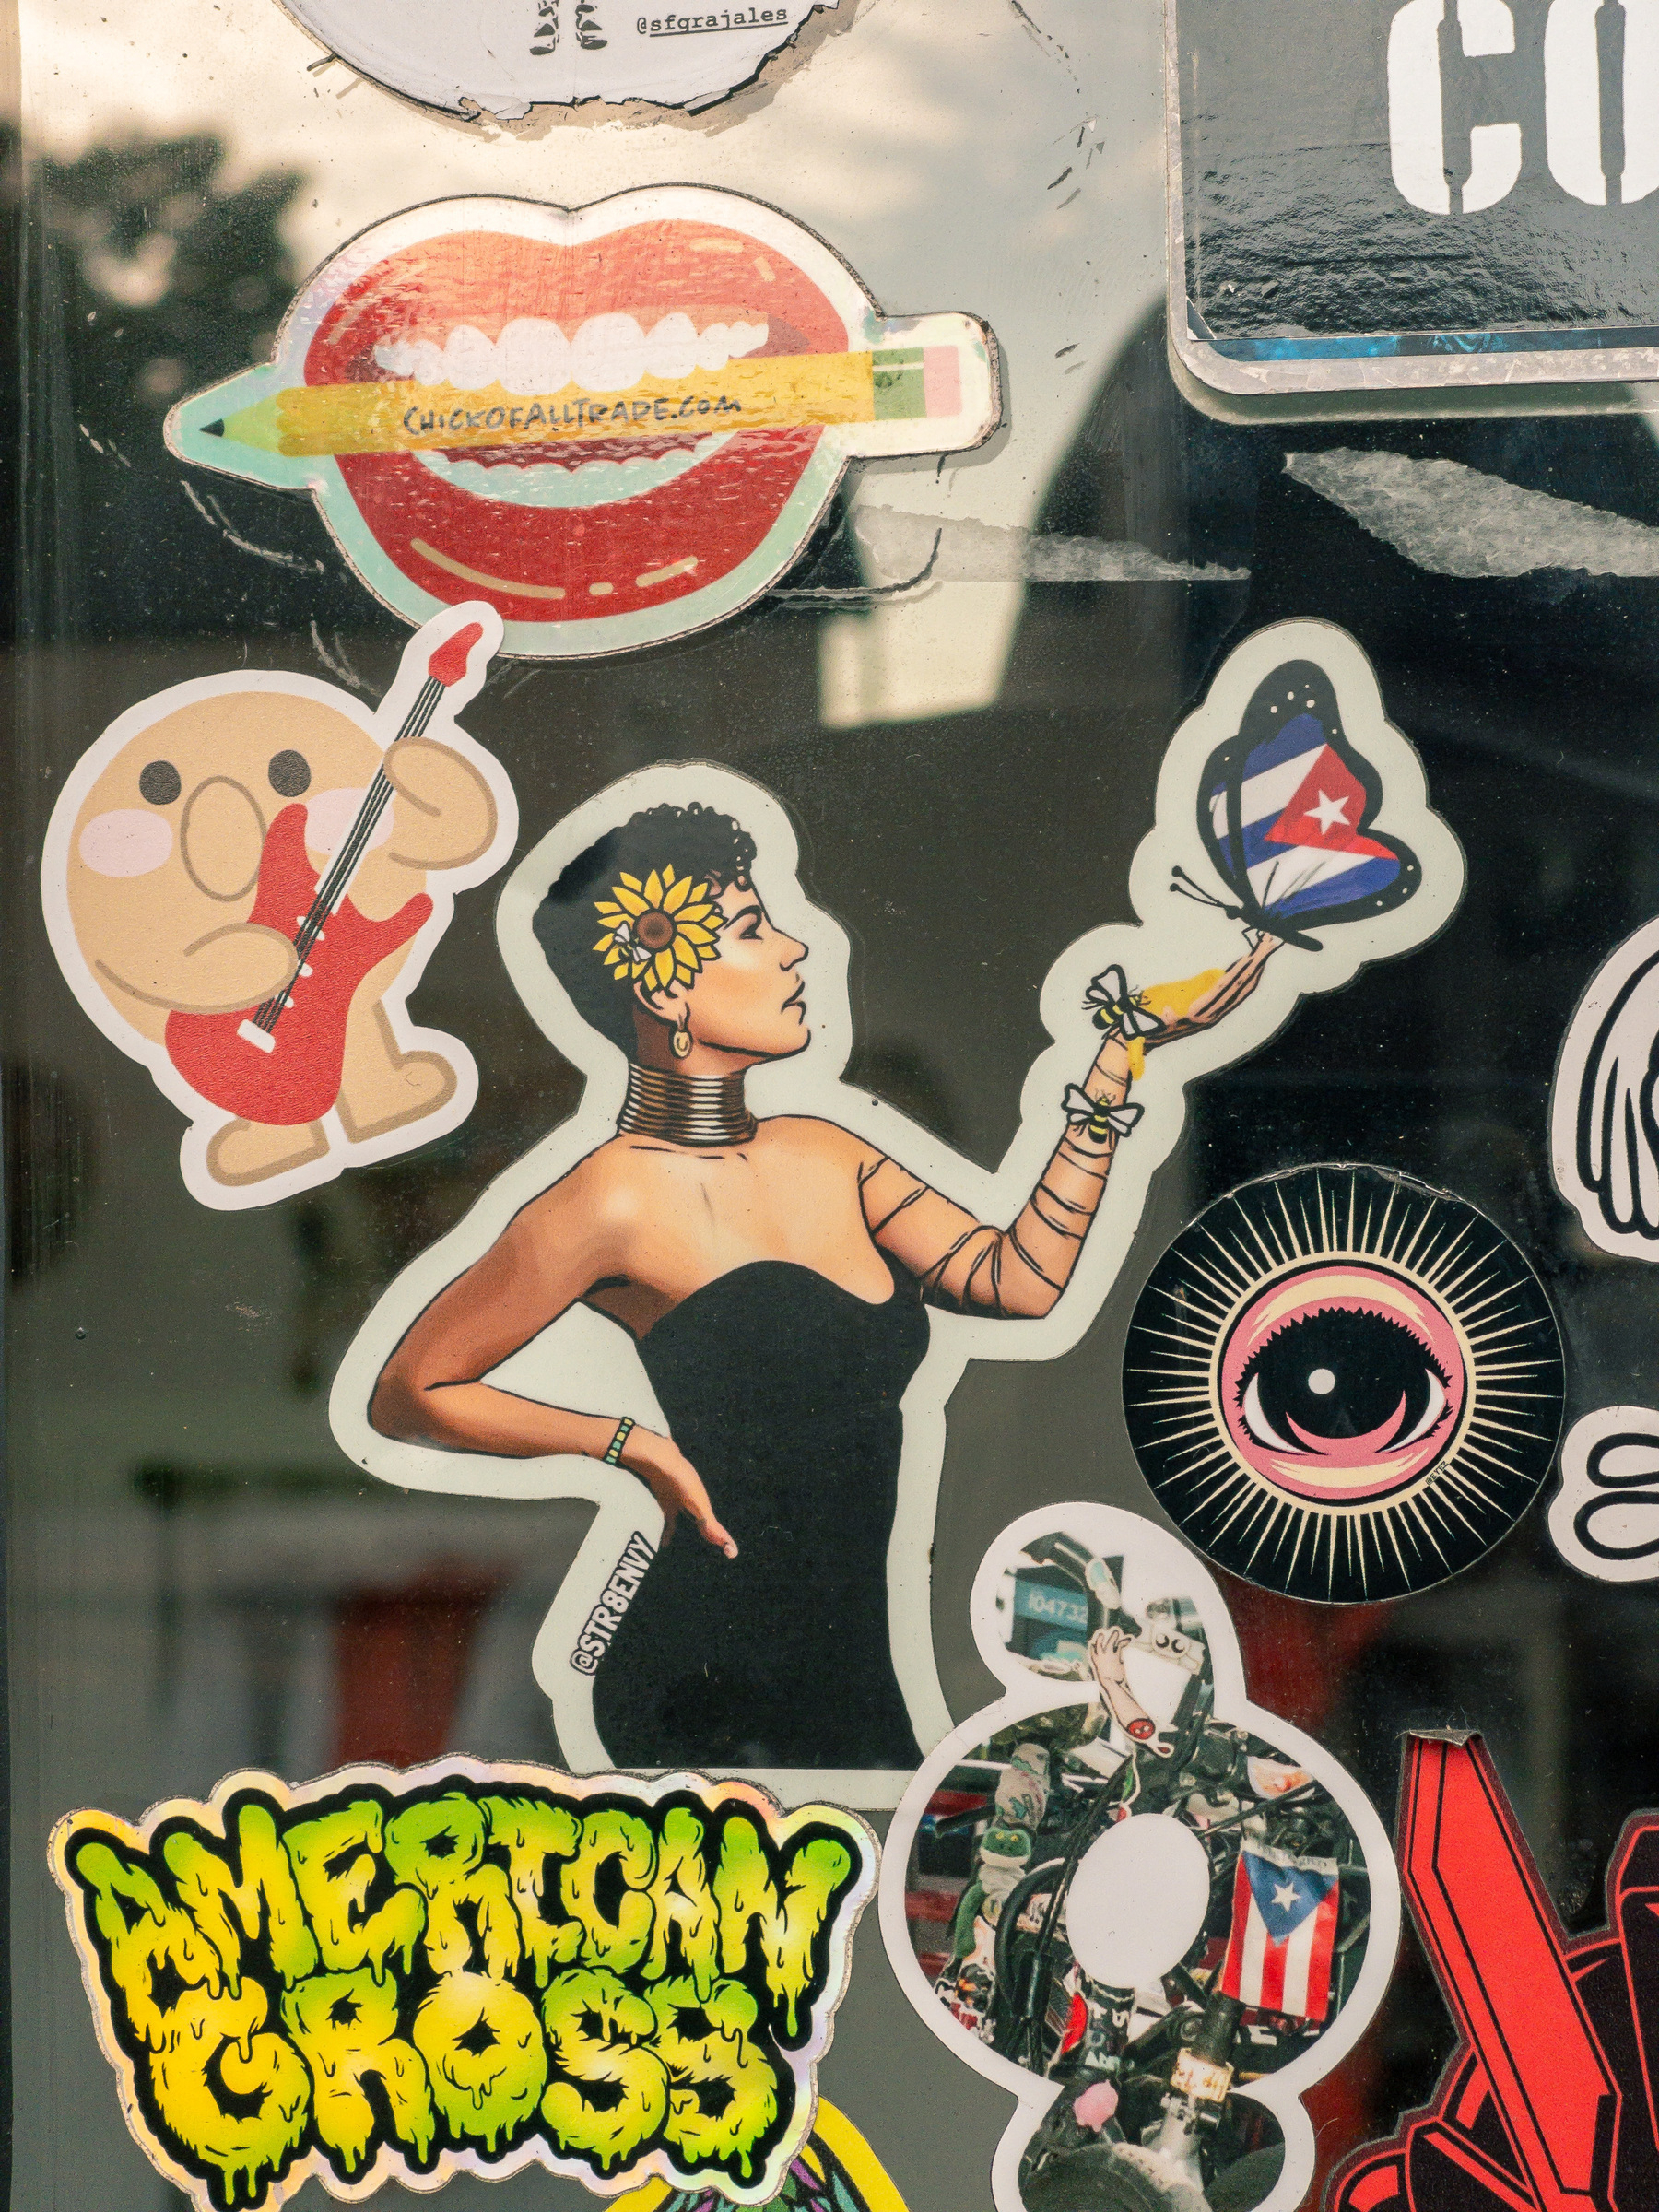 stickers on a window the main subject is a woman in a black sleeveless dress holding up her hand to a butterfly with wings in a Puerto Rican flag motif